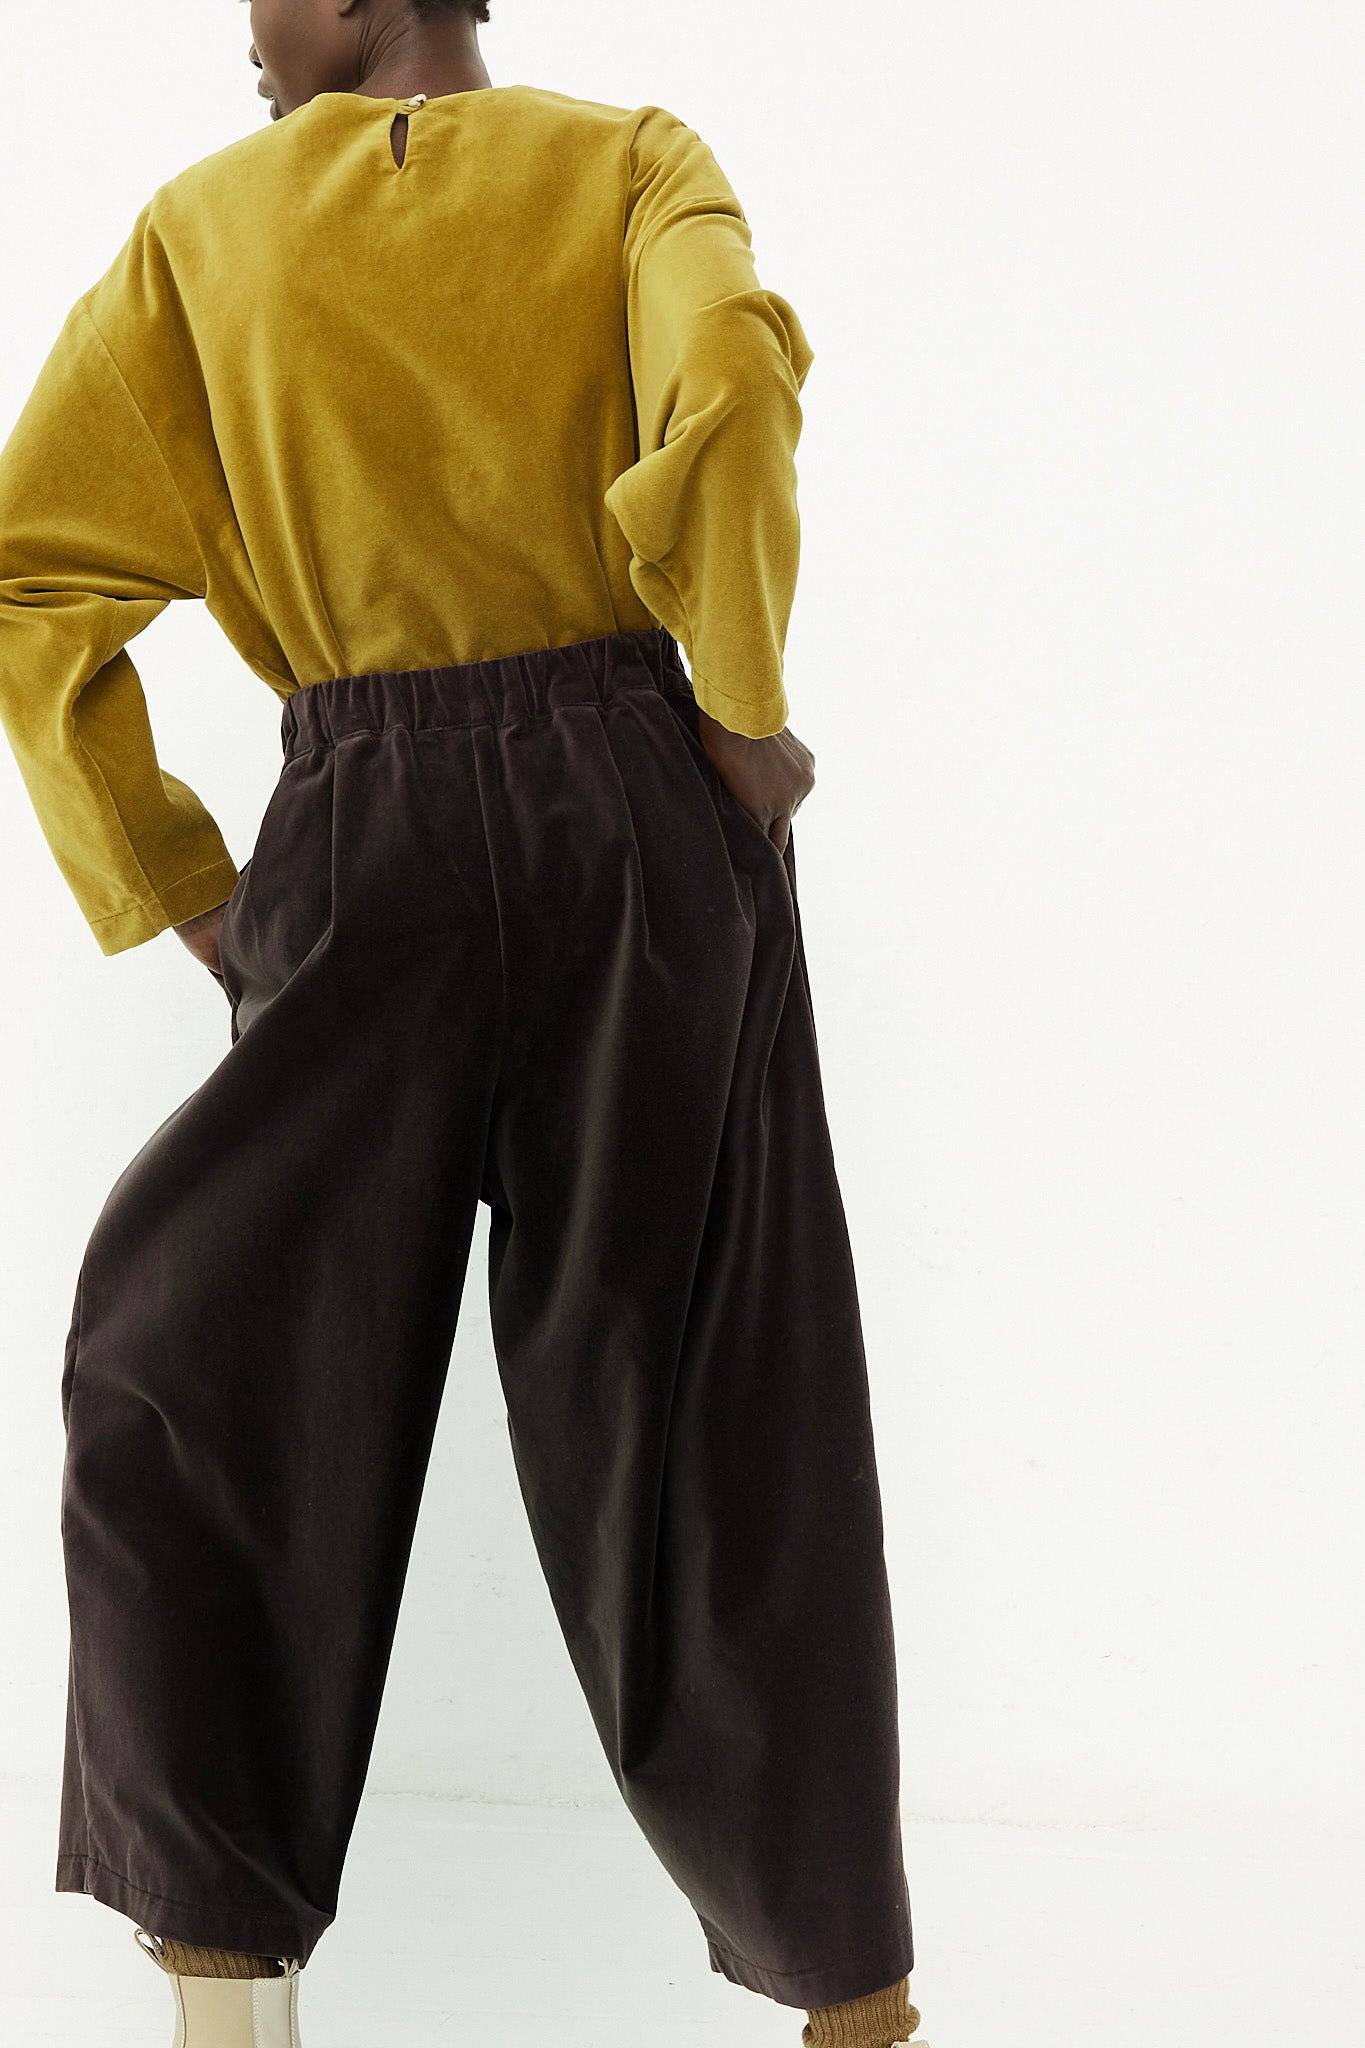 A woman in a yellow shirt with wide leg pants is standing in front of a white background wearing Black Crane's Cotton Velveteen Wide Pants in Sumi Black.